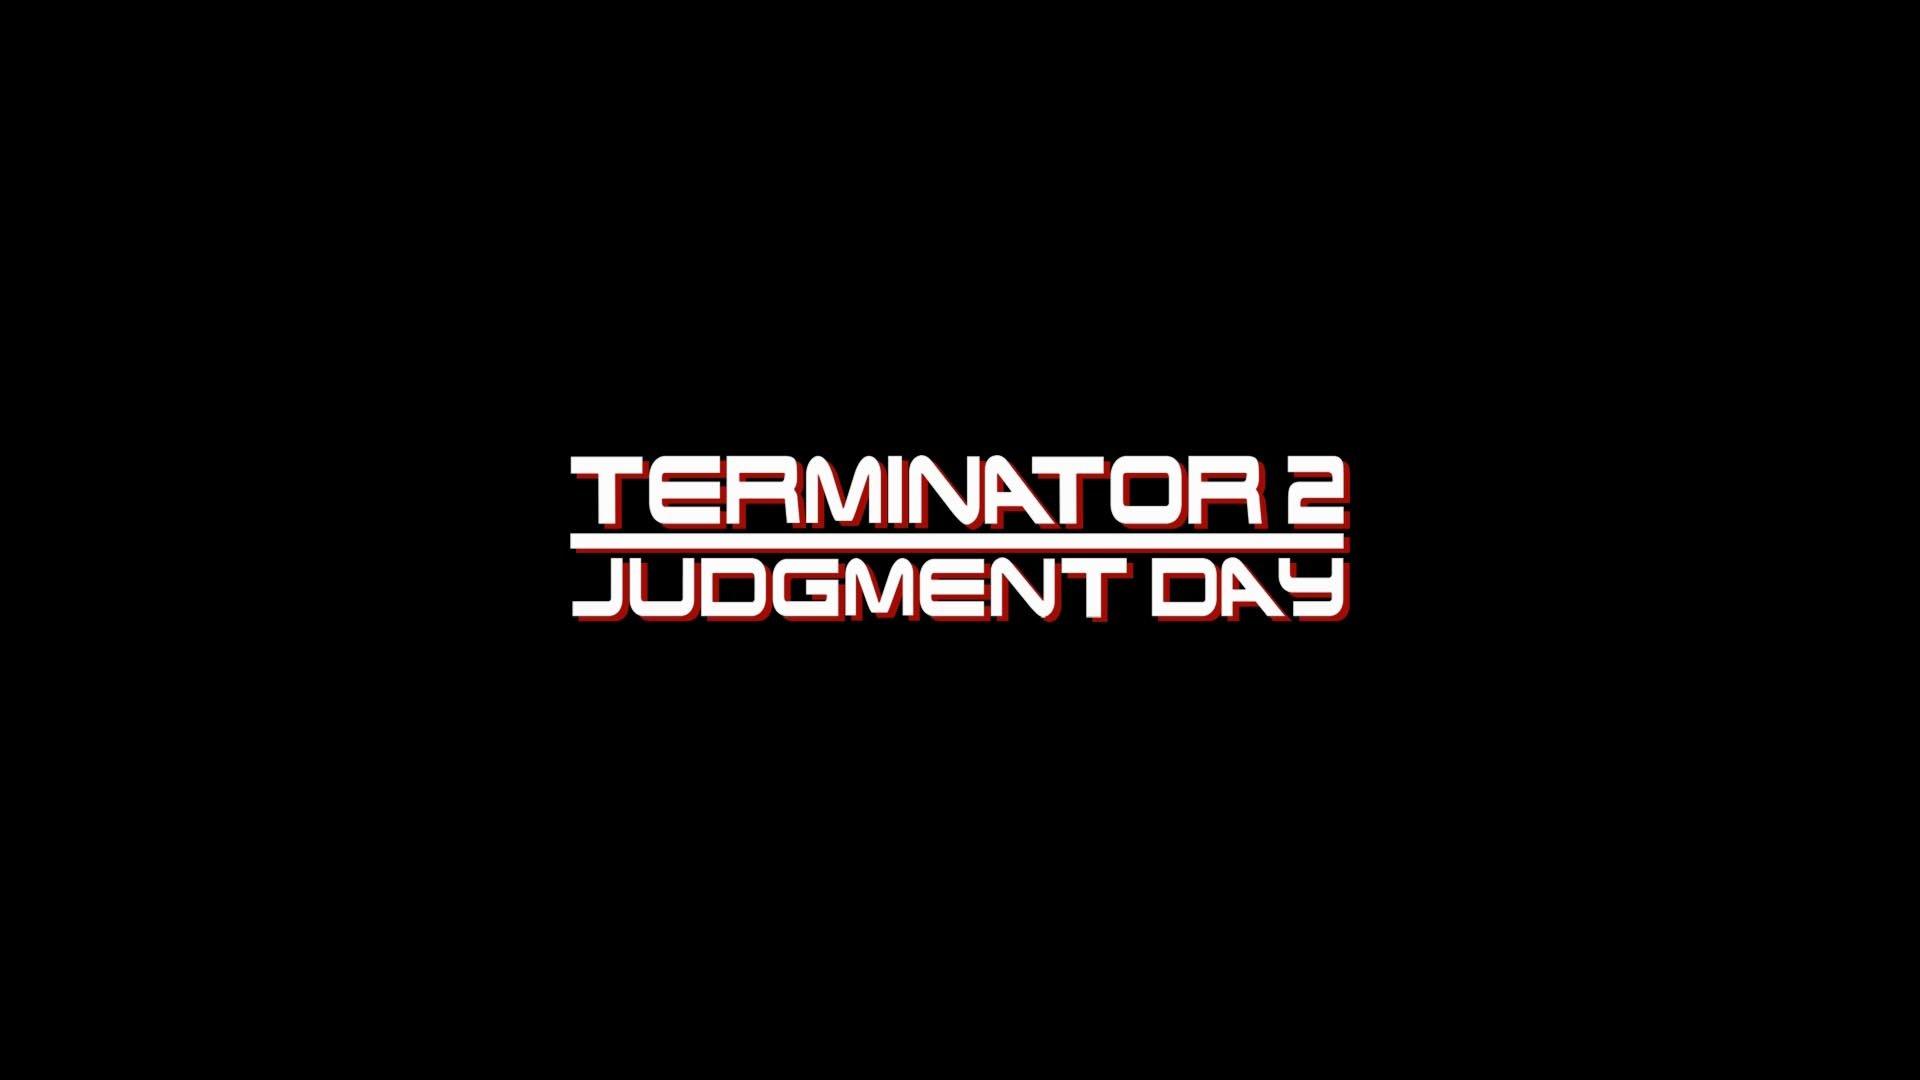 Free Terminator 2: Judgment Day high quality wallpaper